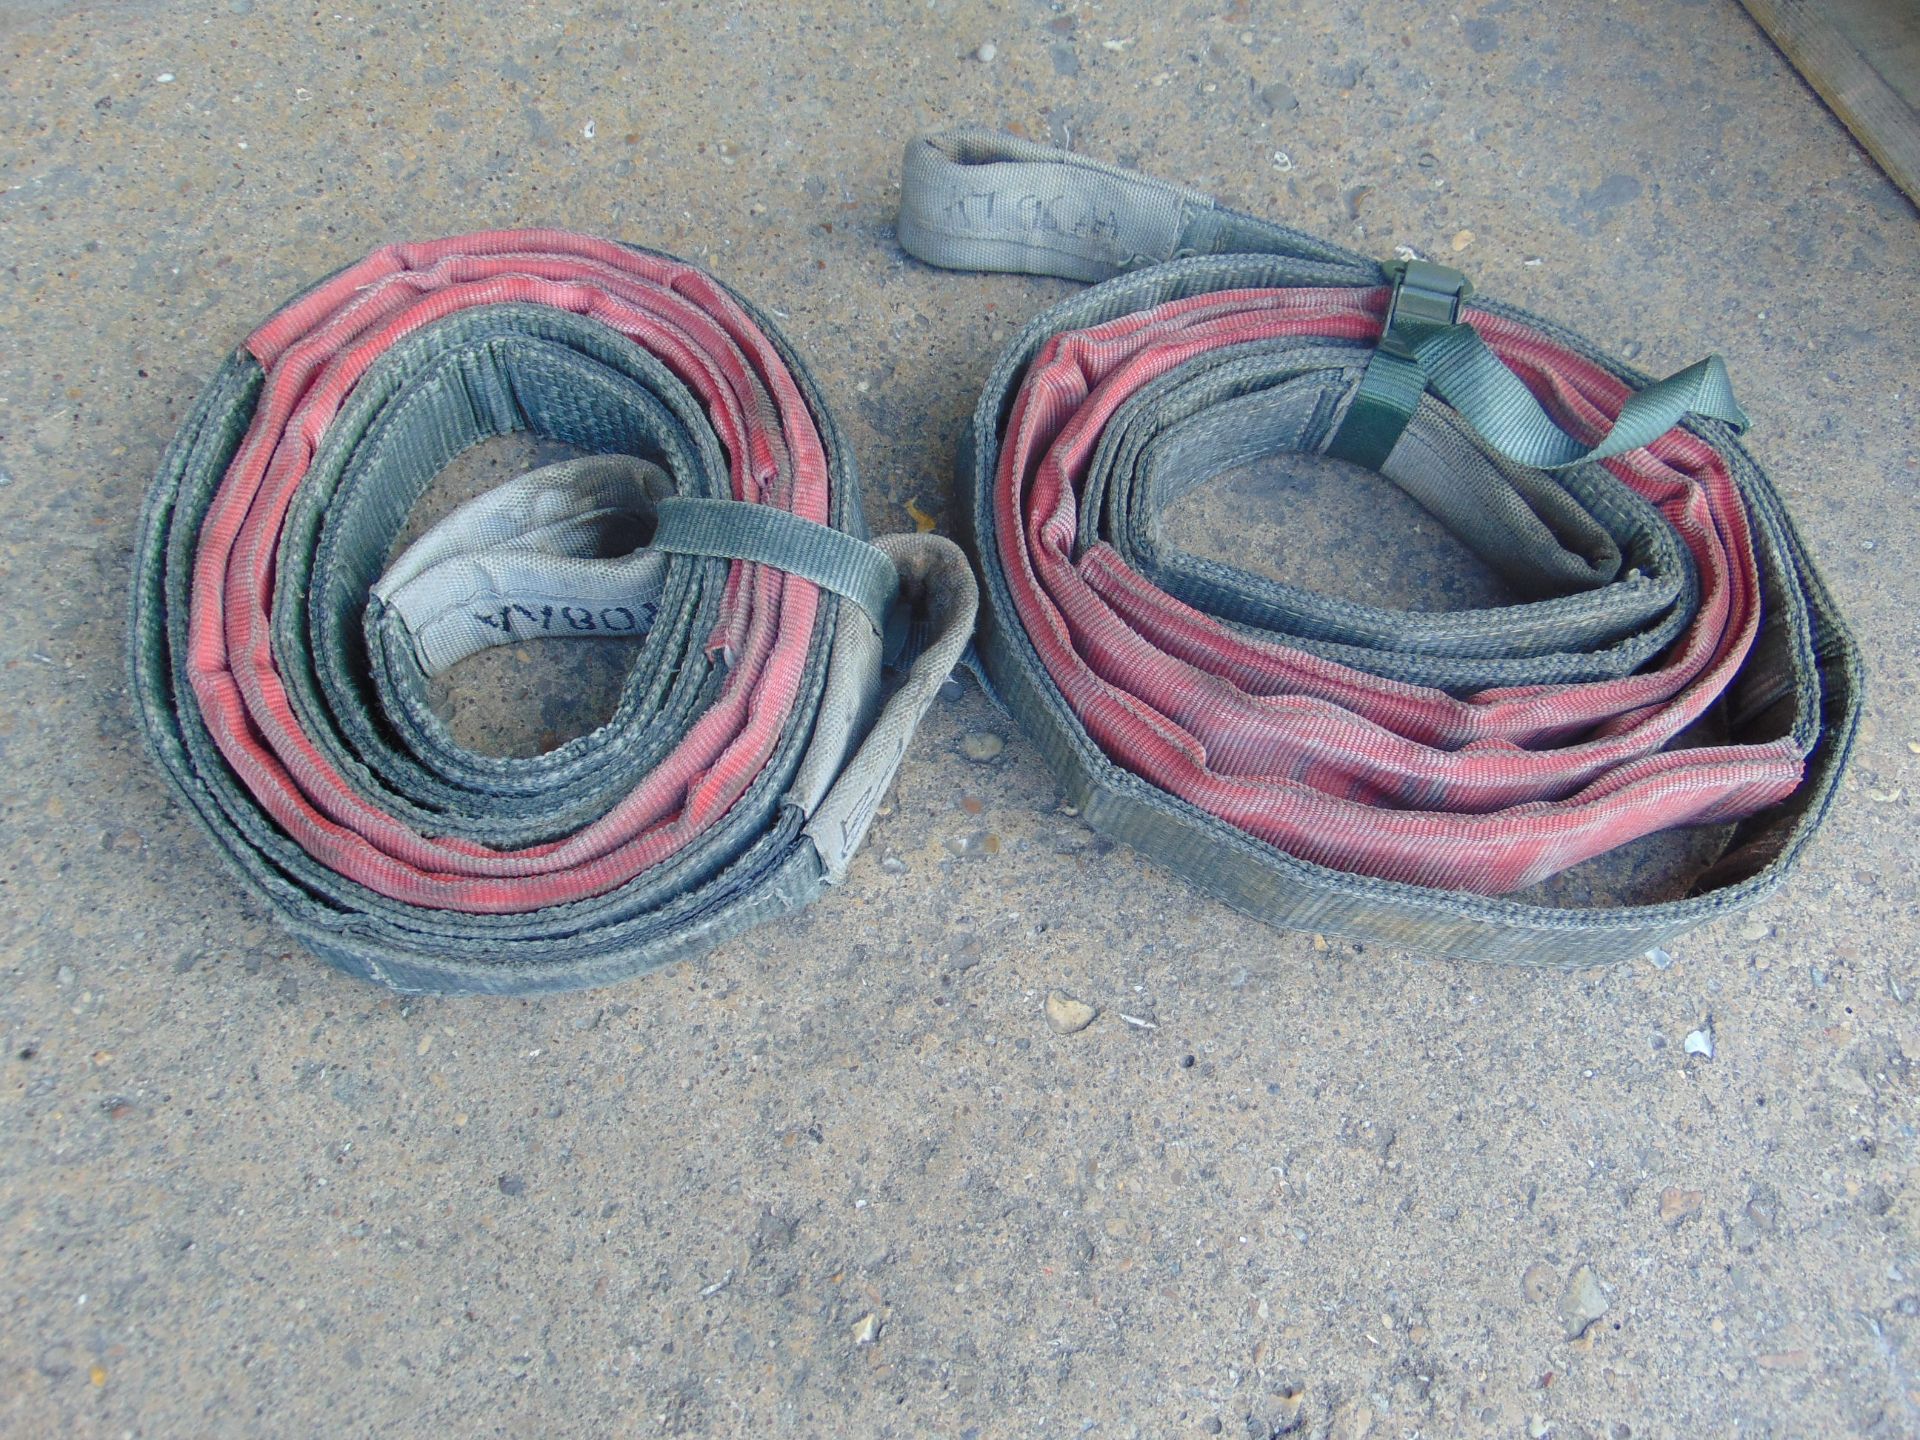 2 x LANDROVER WOLF TOW STROPS WITH WEBBING STRAP - Image 3 of 3